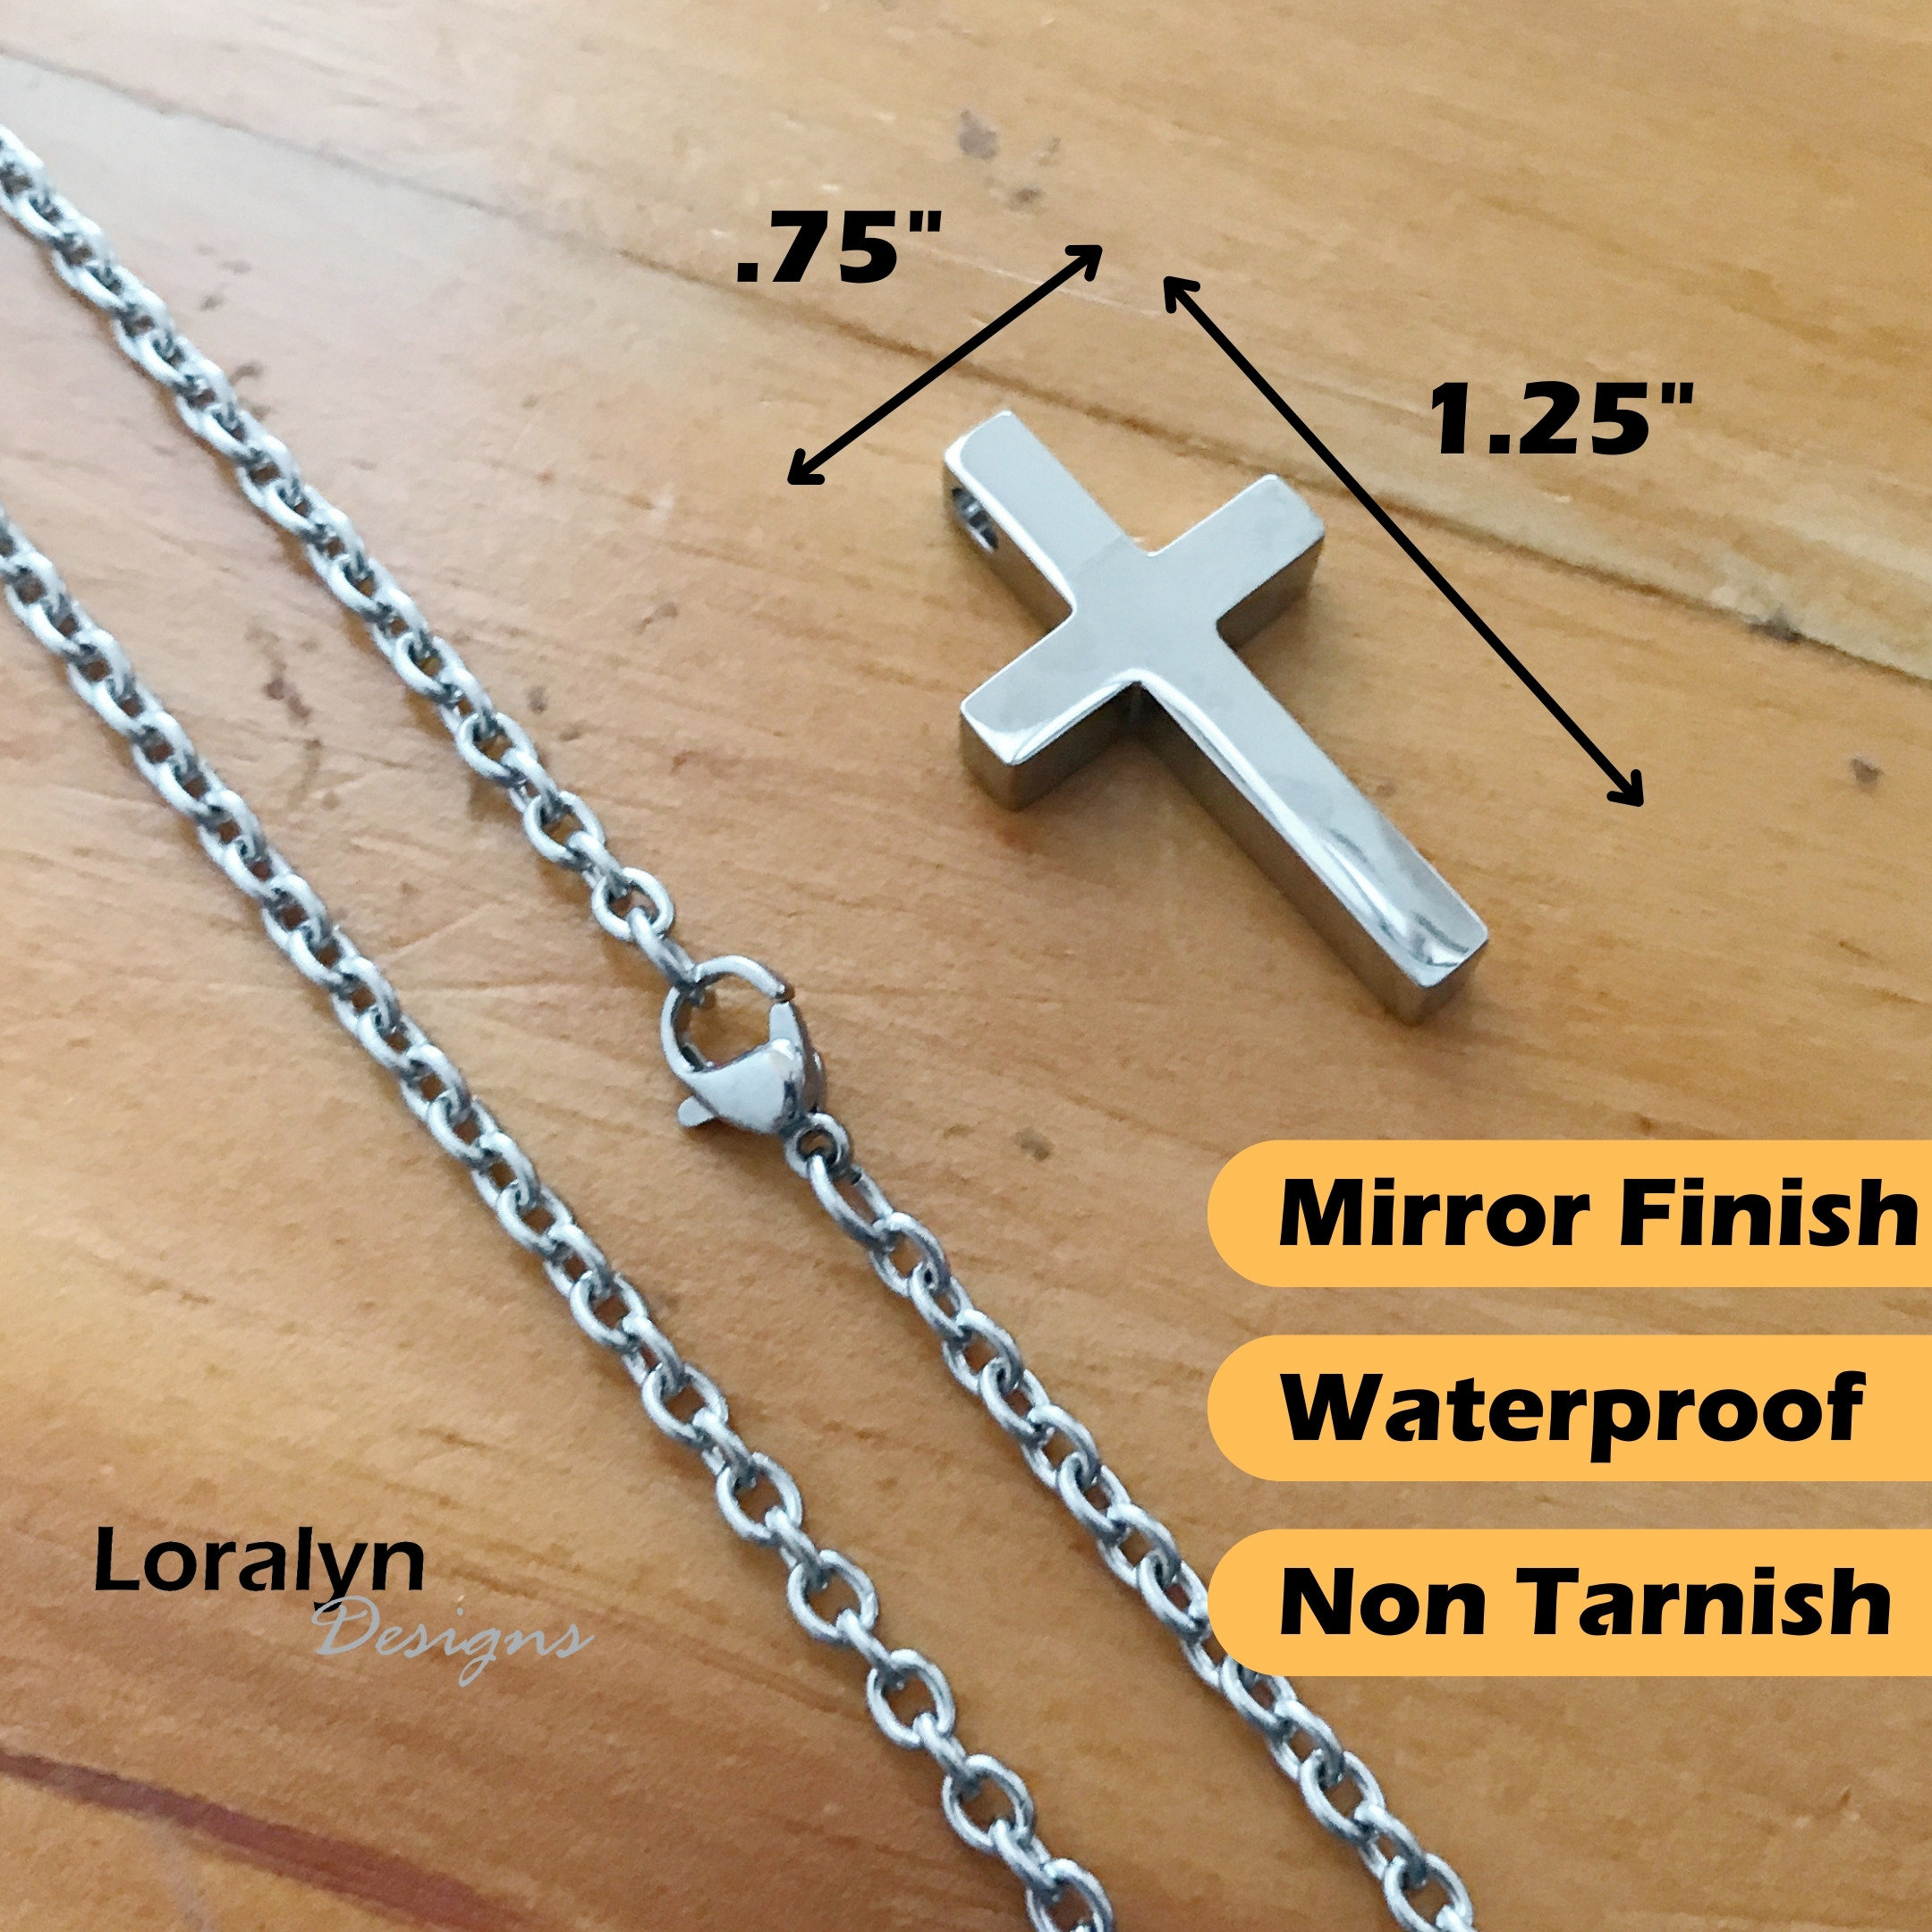 Waterproof Stainless Steel Twist Chain Cross Necklace For Men Statement  Silver Pendant Jewelry, Ideal Birthday Gift For Boyfriend From  Bailushuangs, $15.63 | DHgate.Com